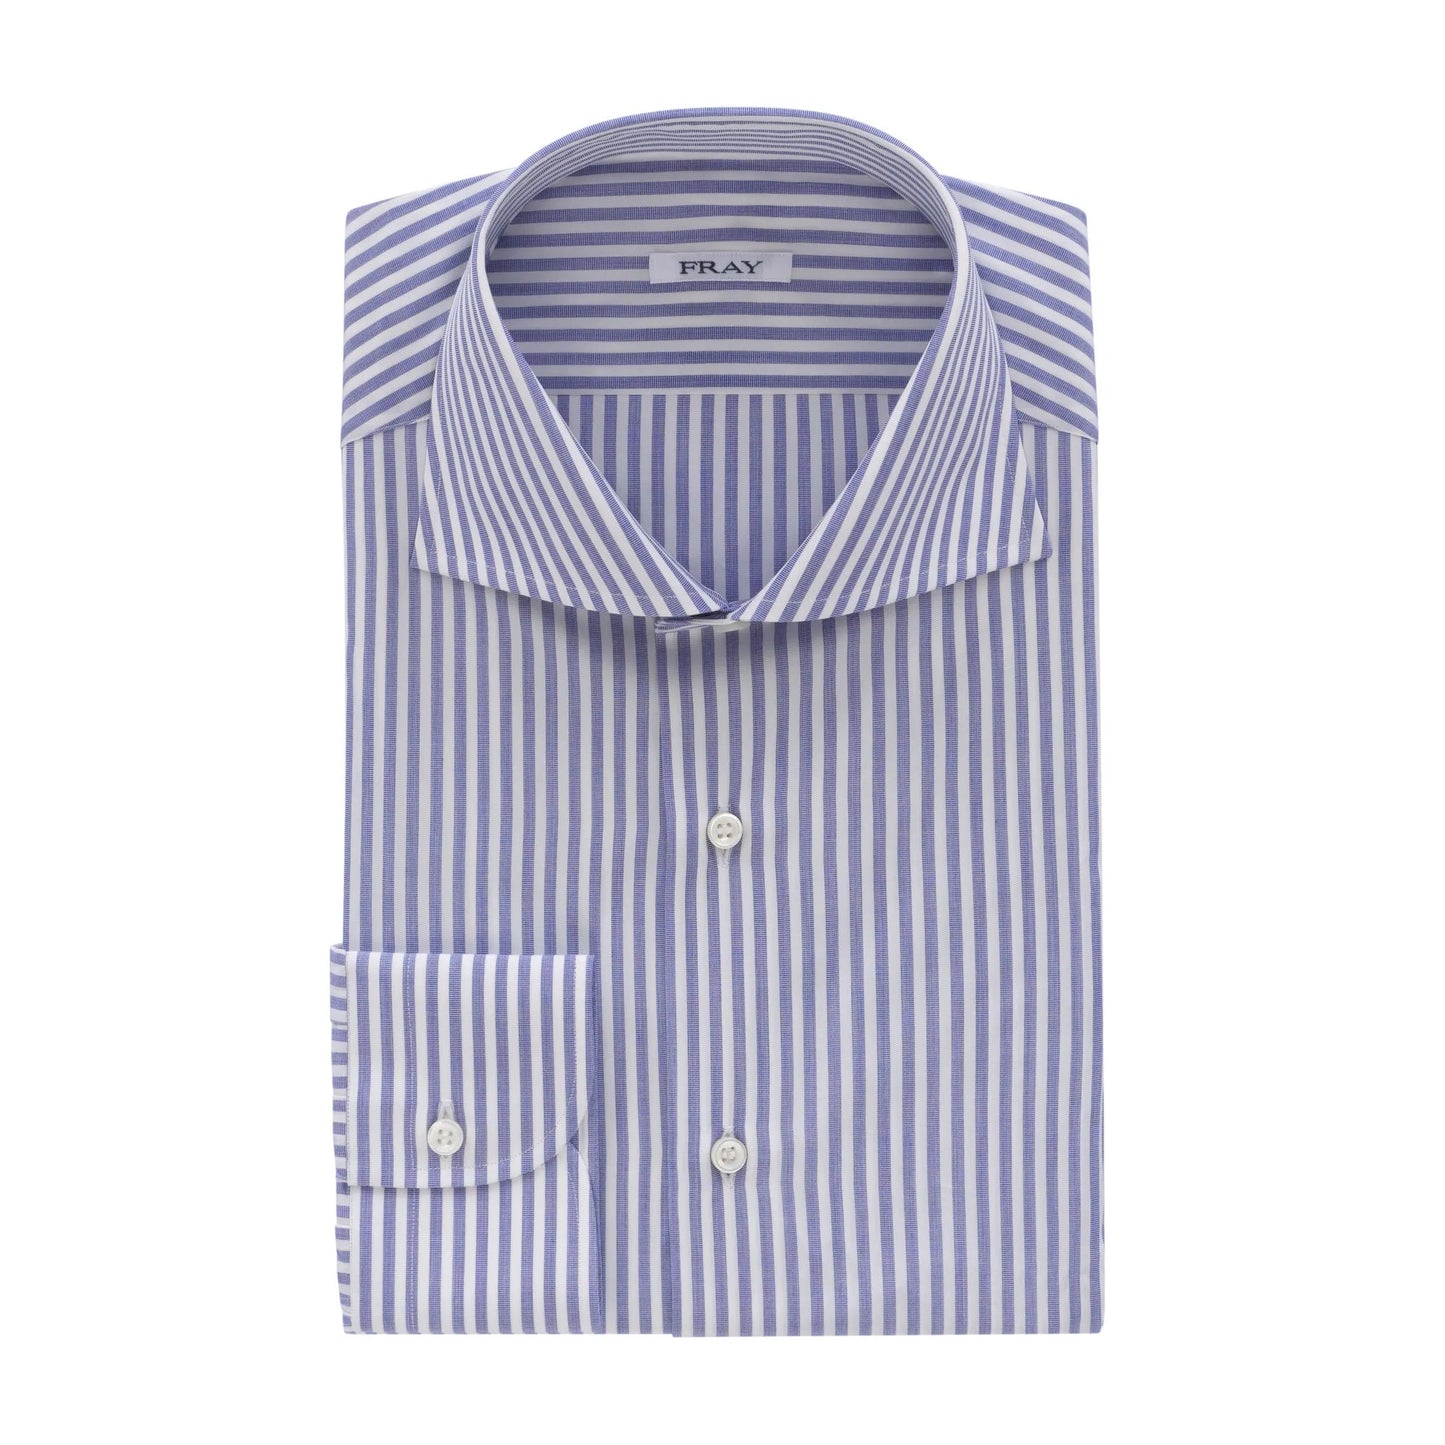 Fray Striped Blue and White Shirt with Spread Collar - SARTALE